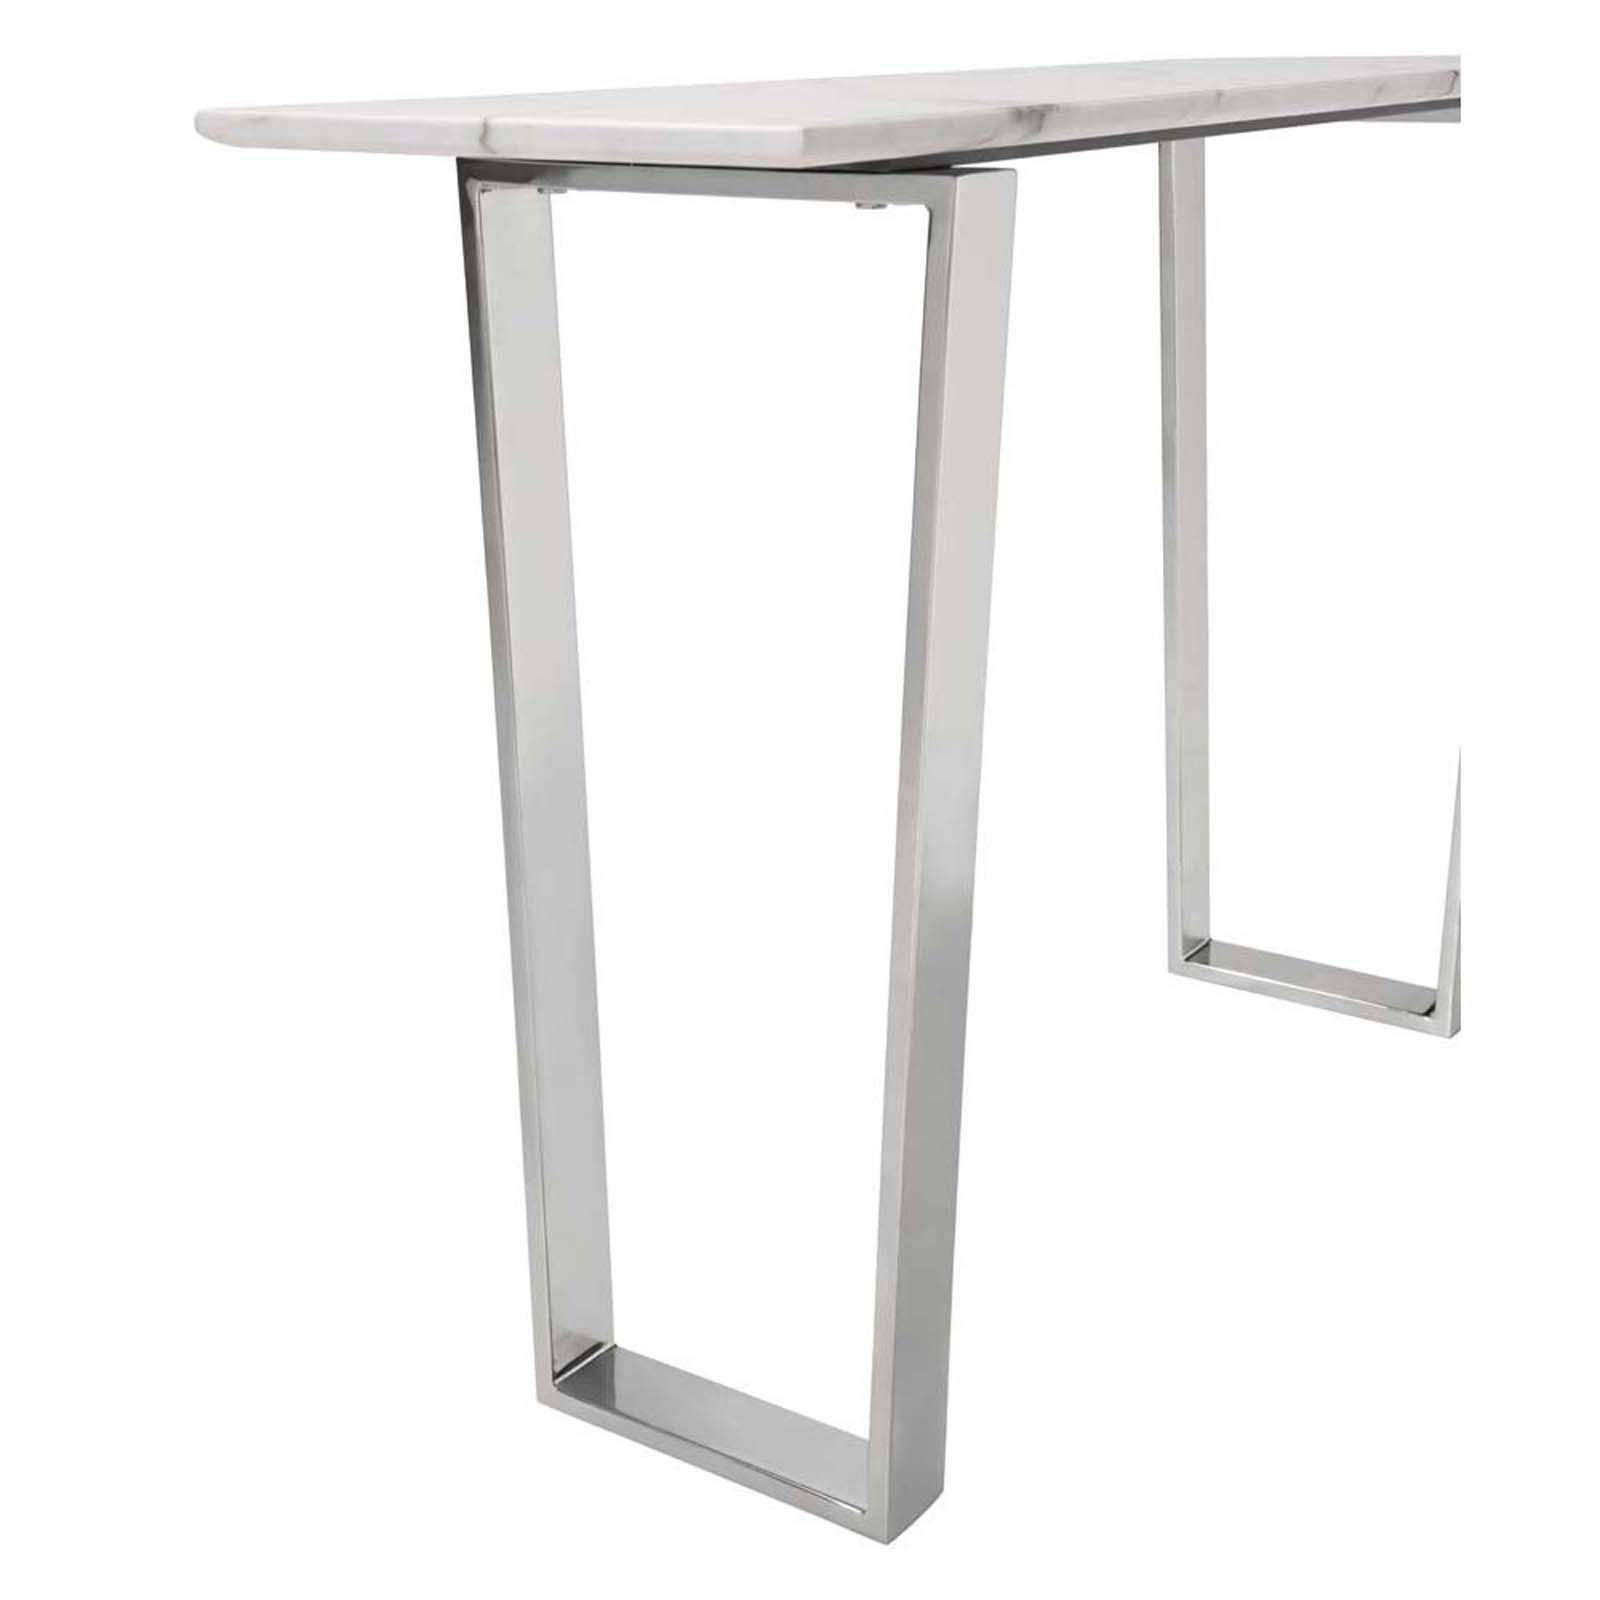 Stainless Steel Console Tables Pertaining To Recent Atlas Console Table Stone & Brushed Stainless Steel (View 2 of 10)